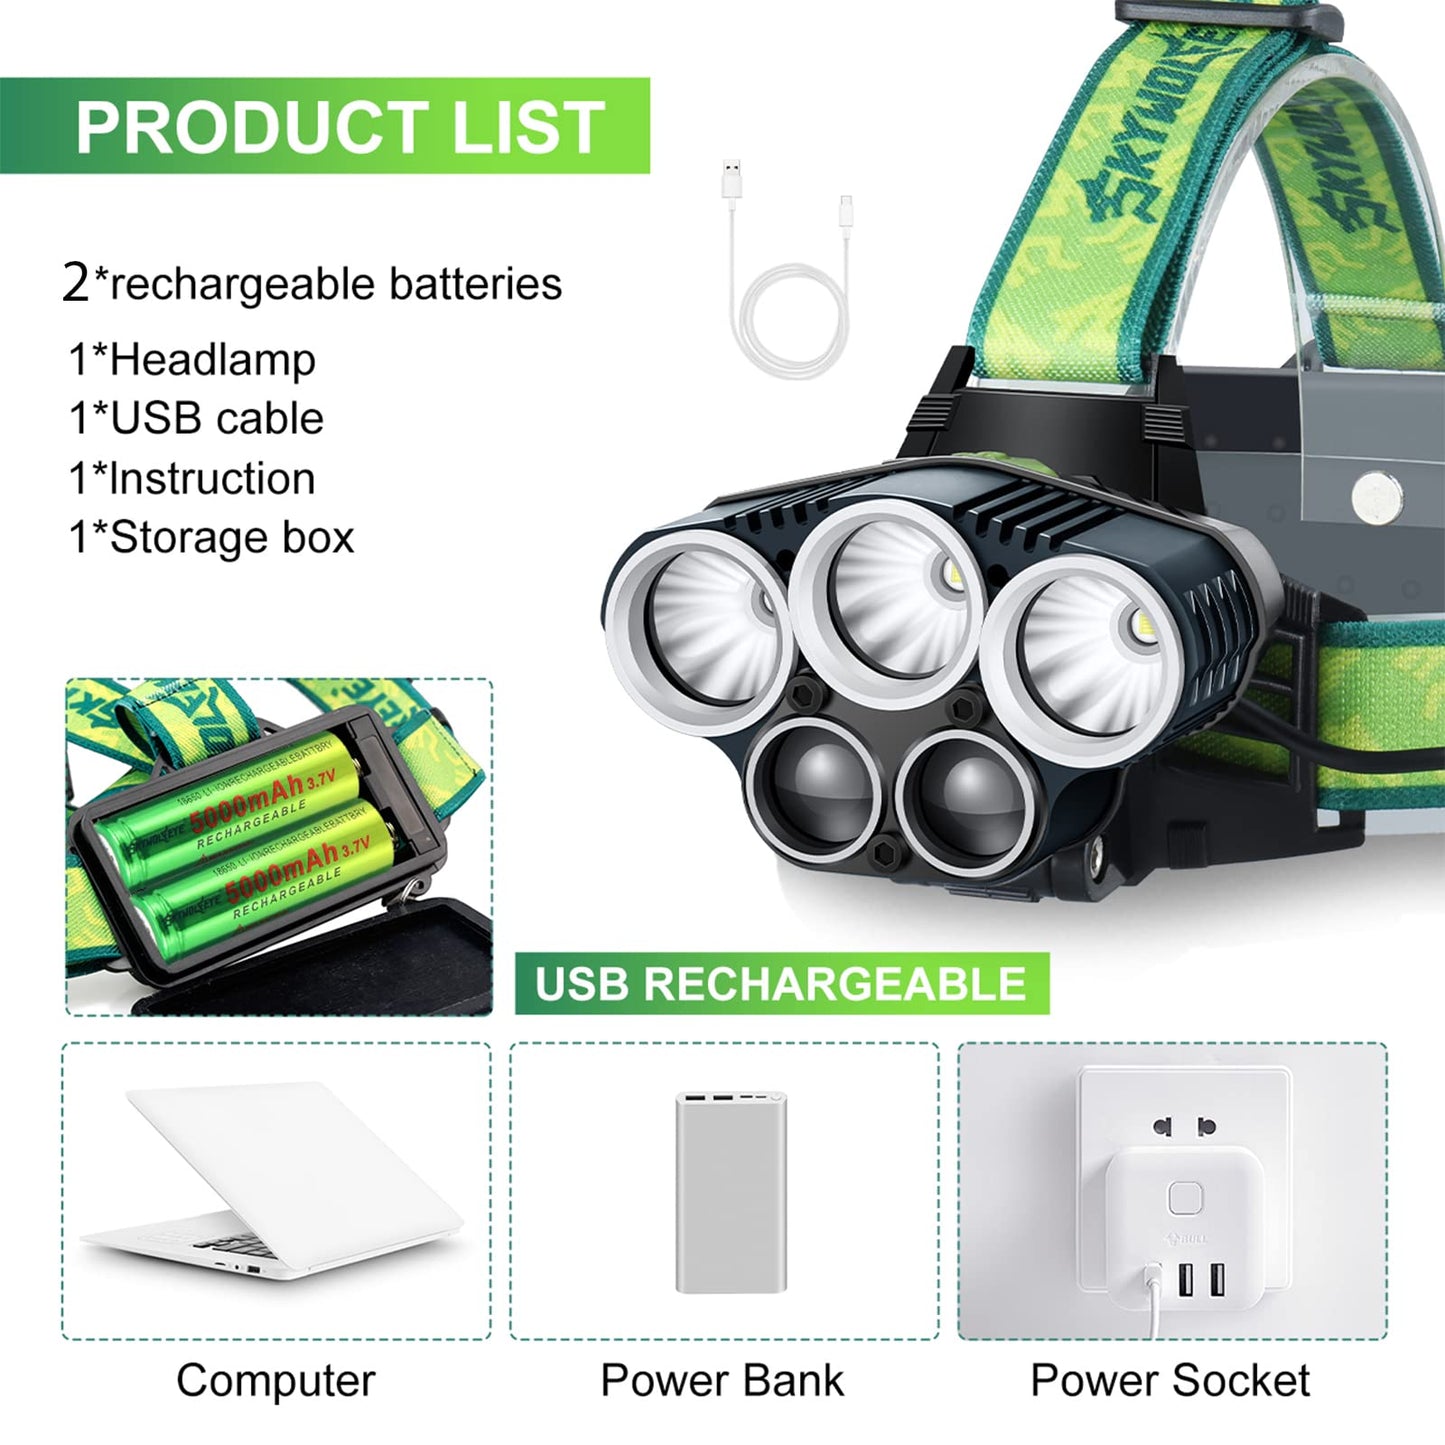 USB Charging Strong Light 5LED Outdoor Camping Headlight